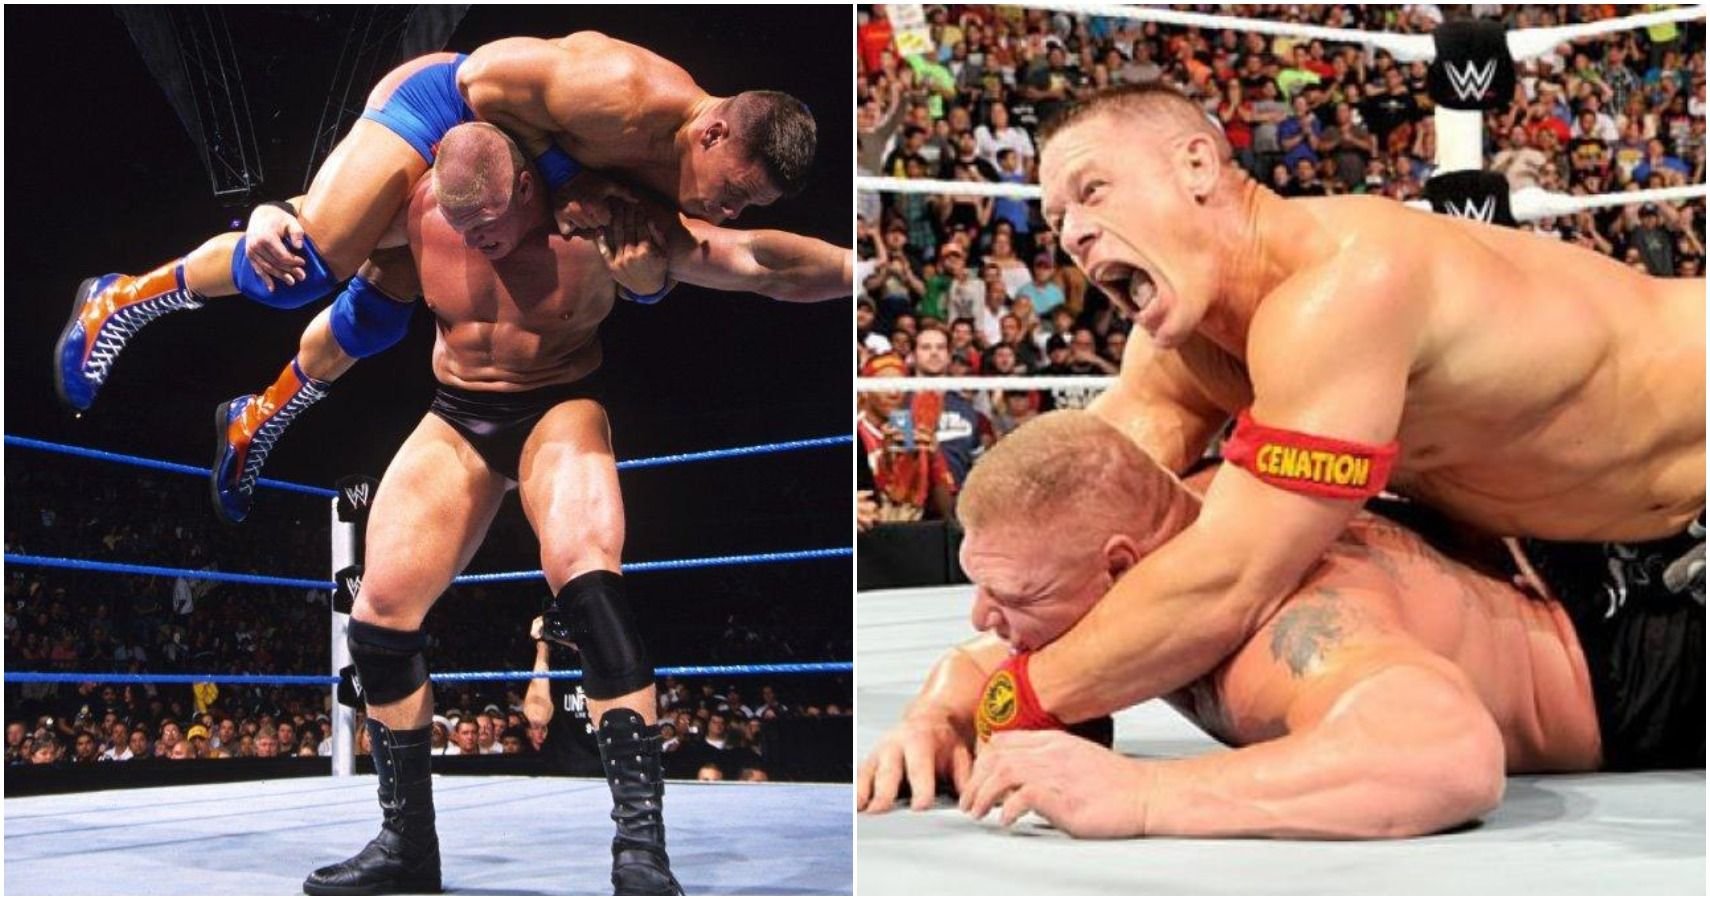 Every John Cena Vs Brock Lesnar Match, Ranked From Worst To Best